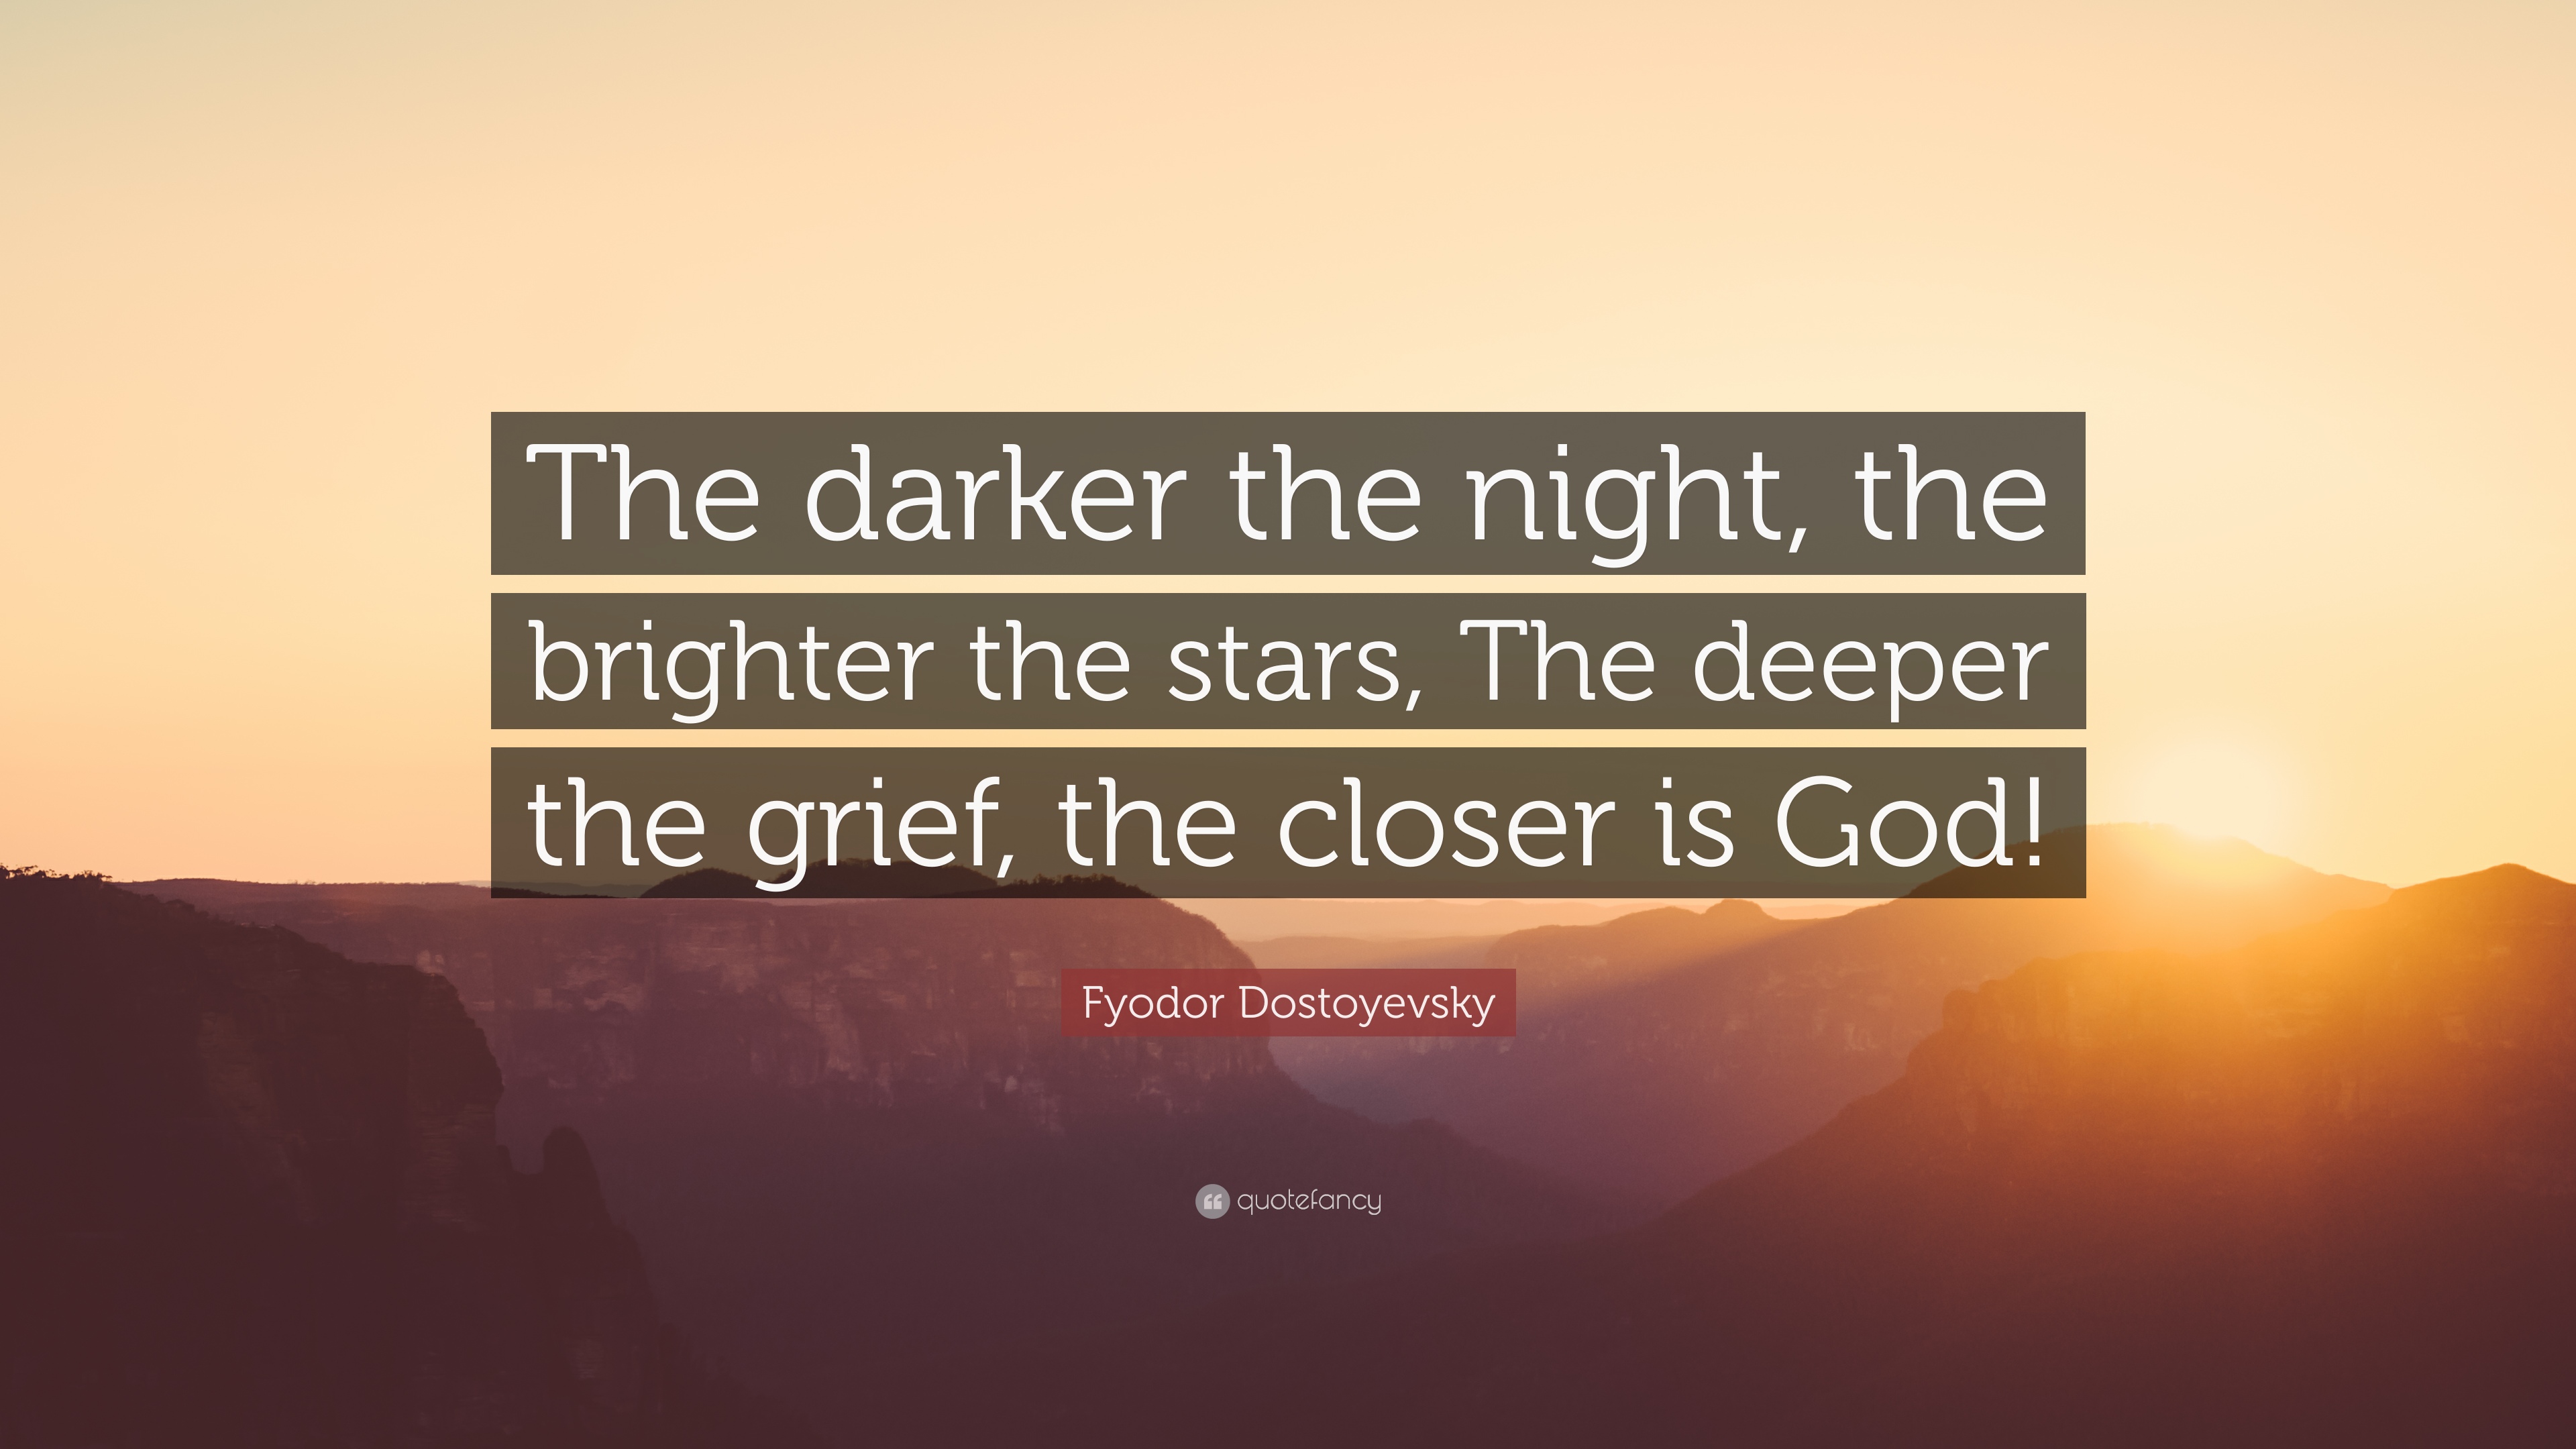 Fyodor Dostoyevsky Quote: “The darker the night, the brighter the ...